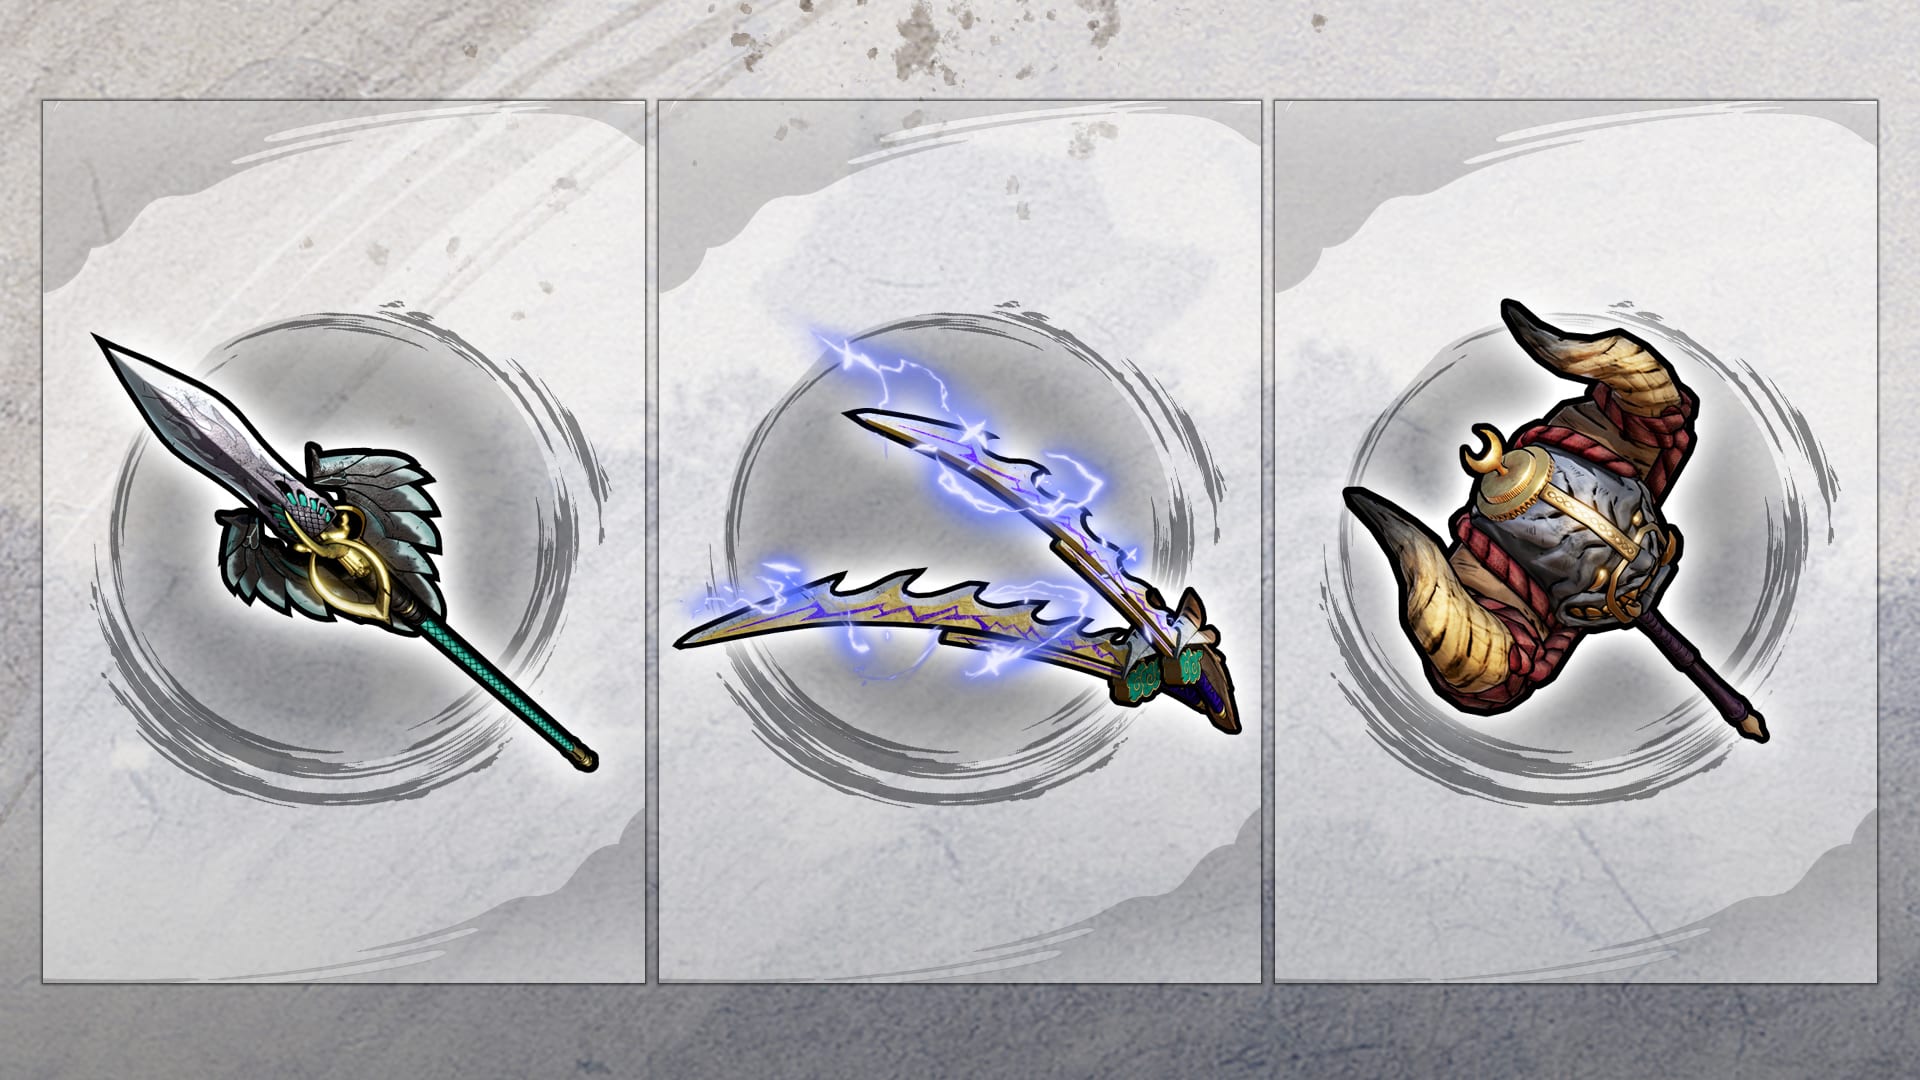 Additional Weapon set 4